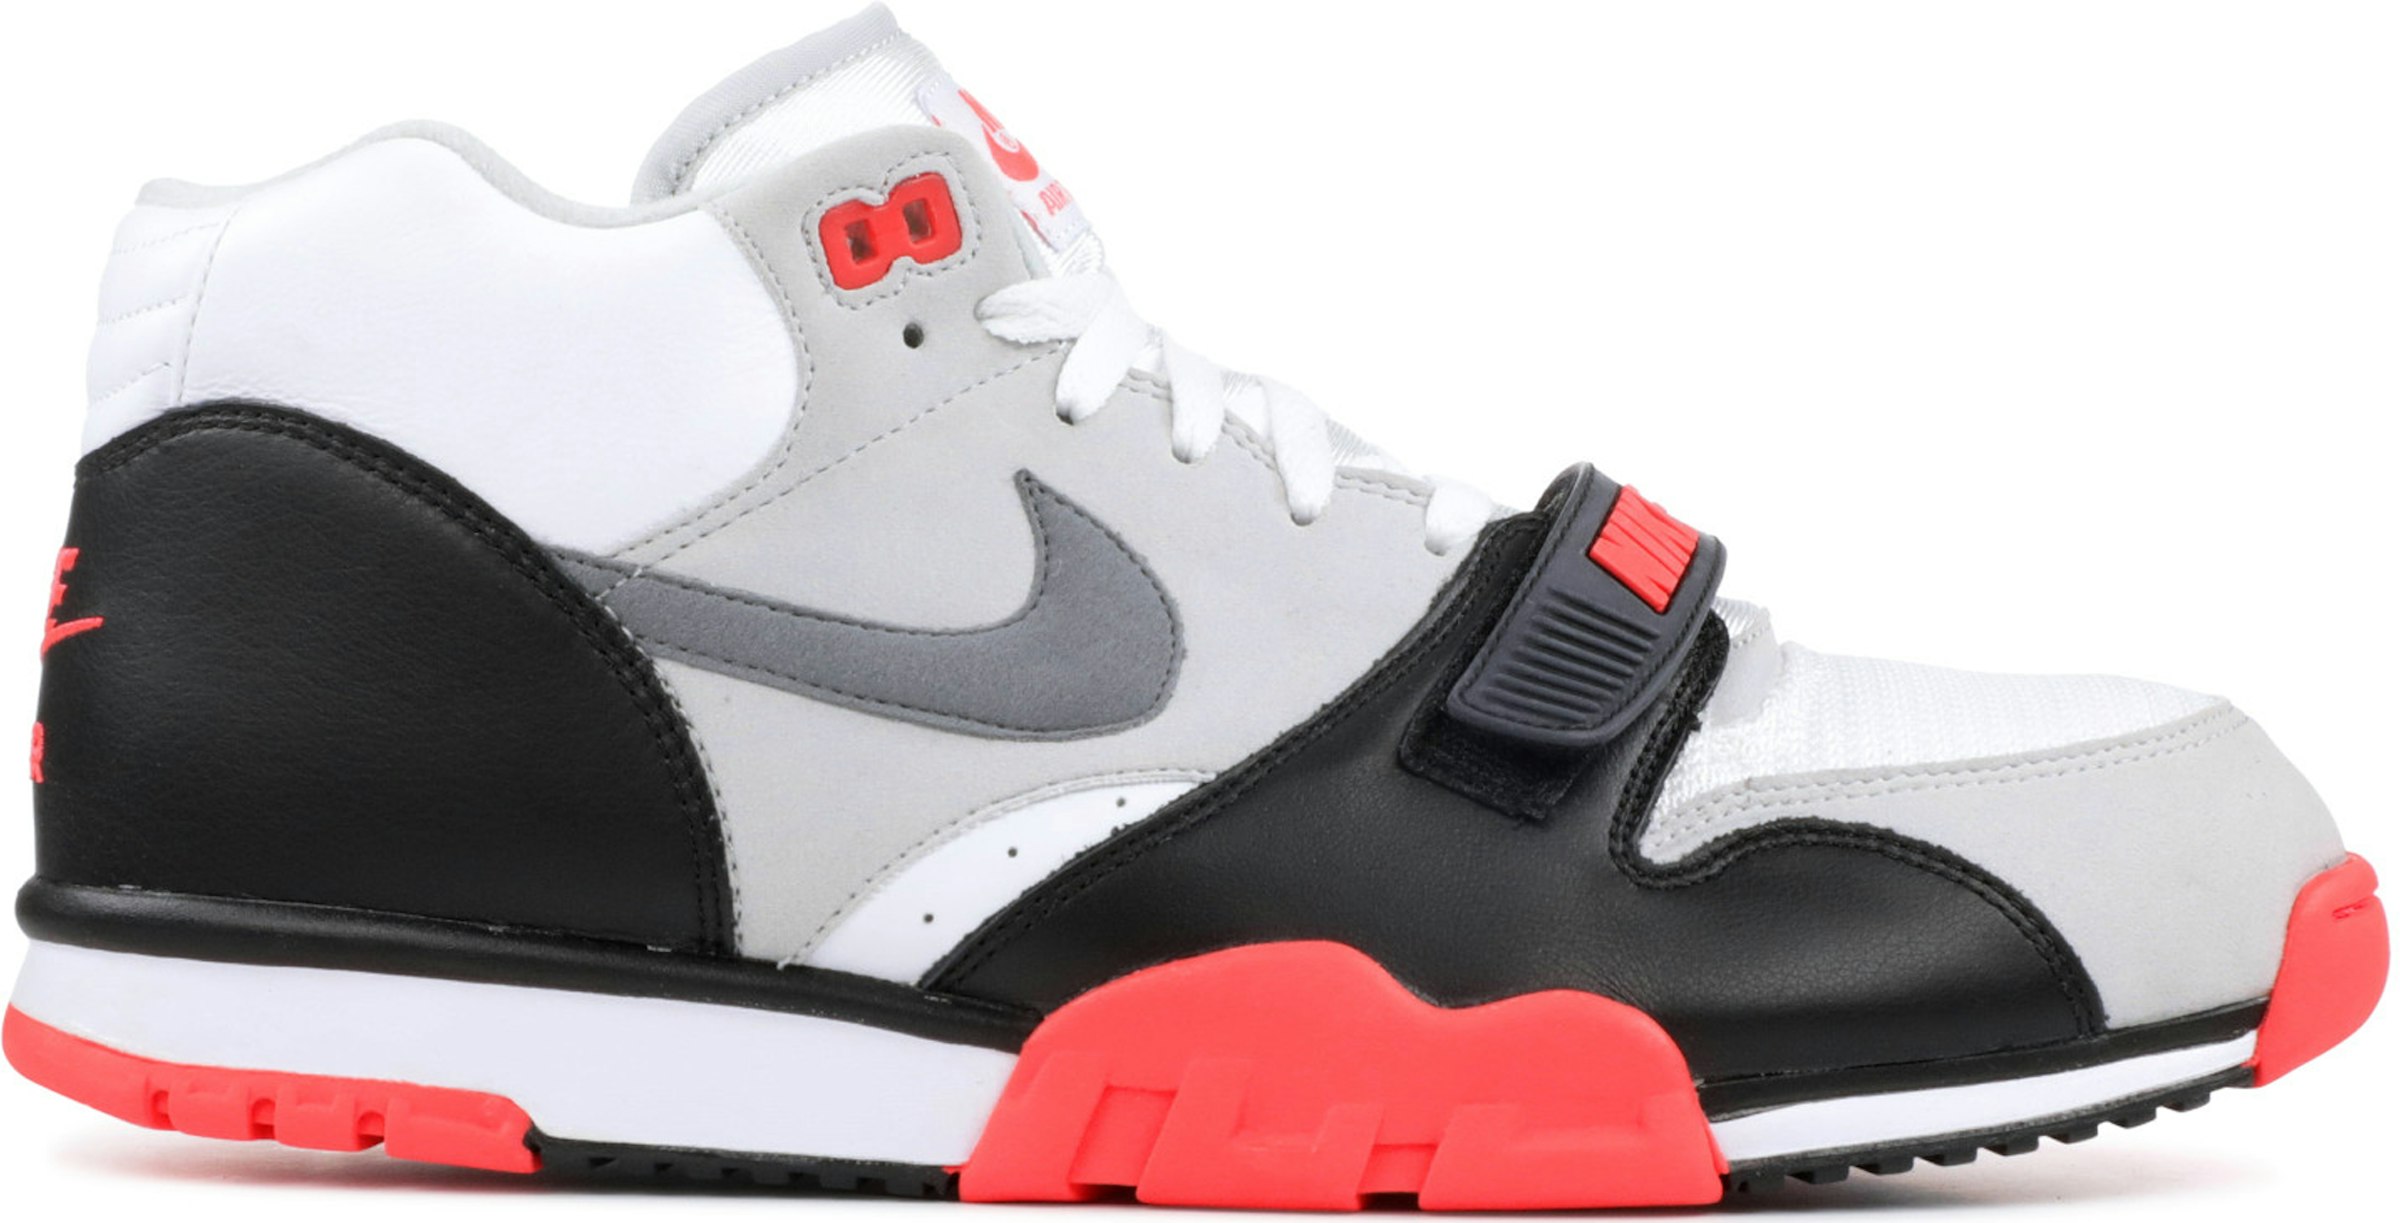 dulce carril Adentro Nike Air Trainer 1 Mid Infrared Men's - 607081-100 - US